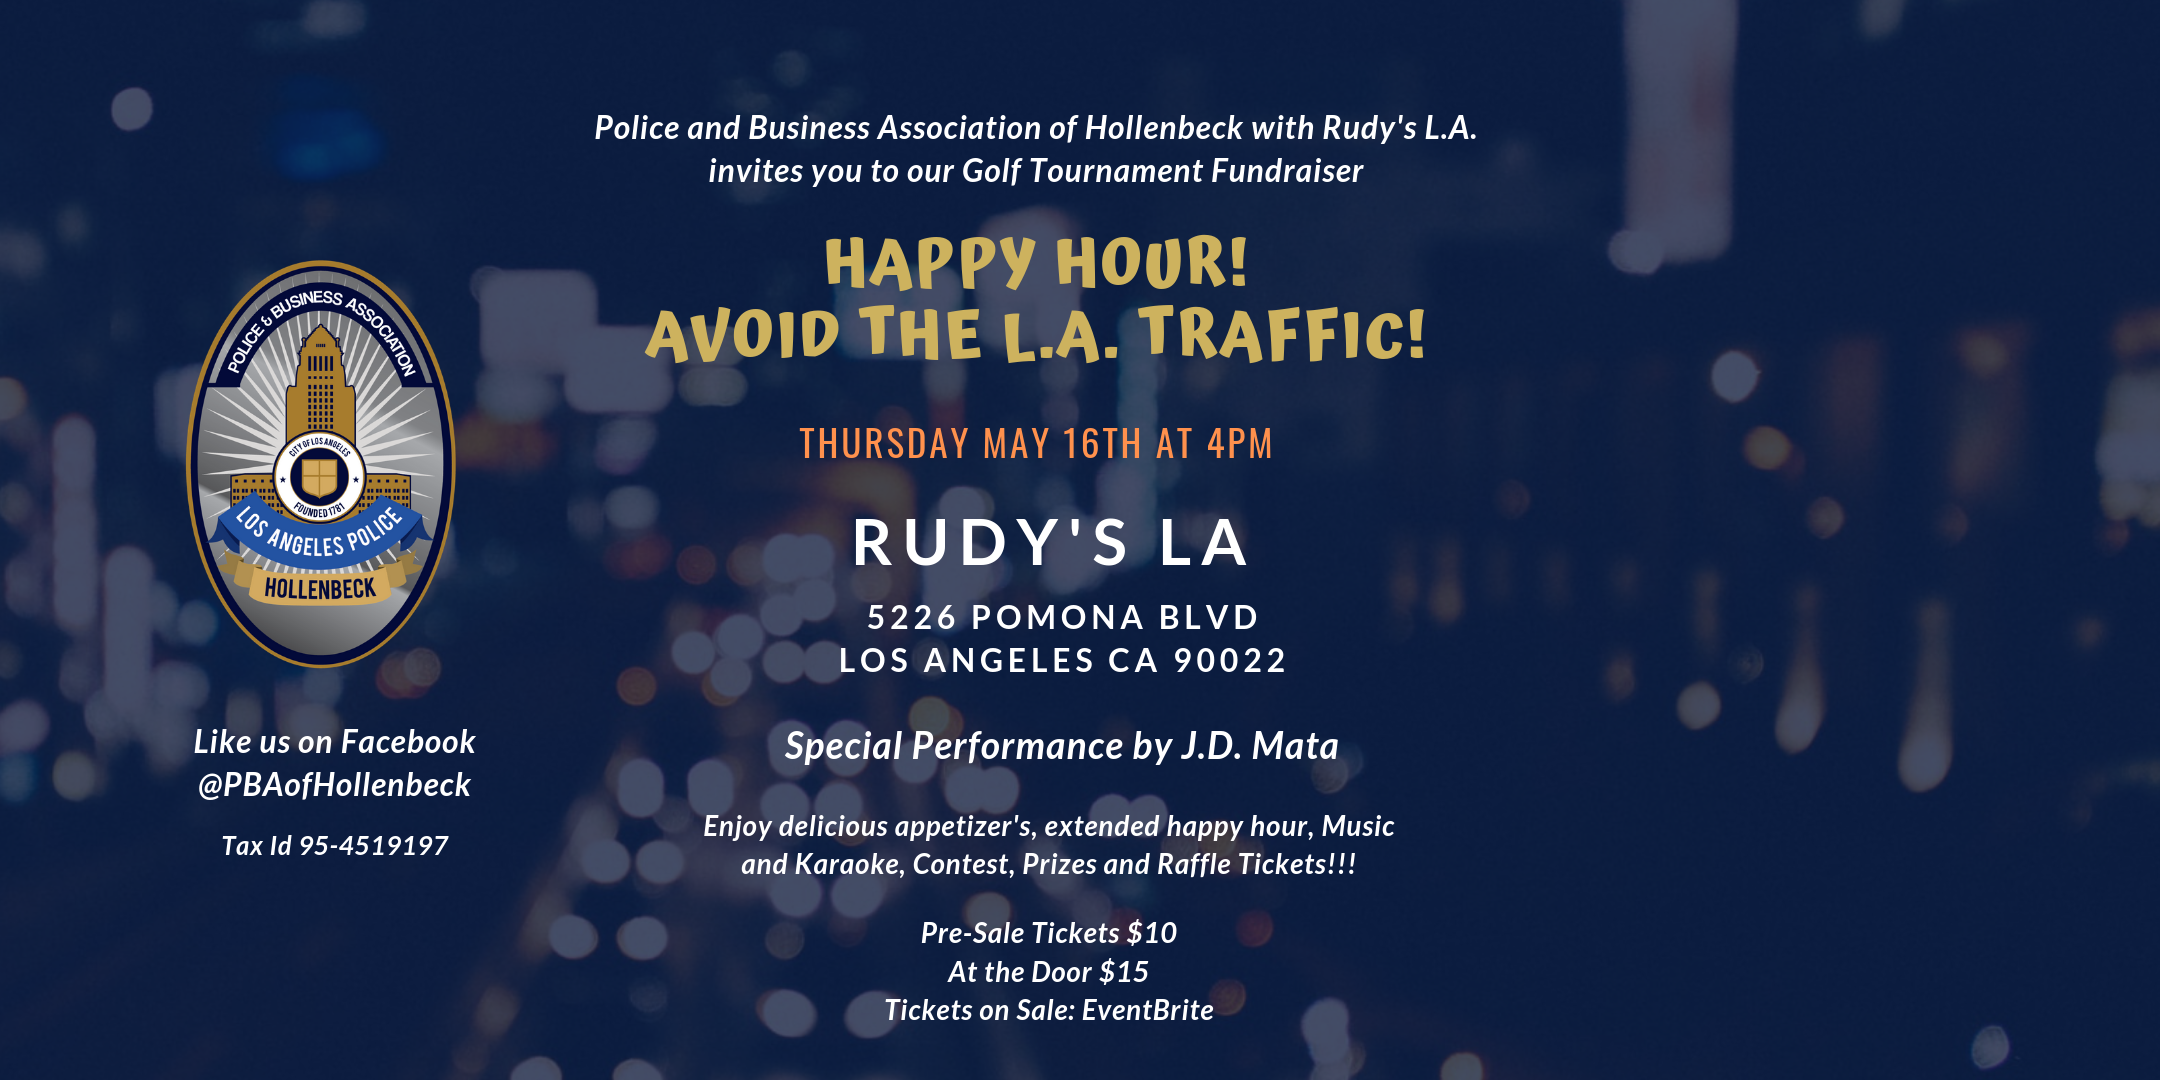 Happy Hour and Networking Golf Tournament Fundraiser at Rudy's L.A.